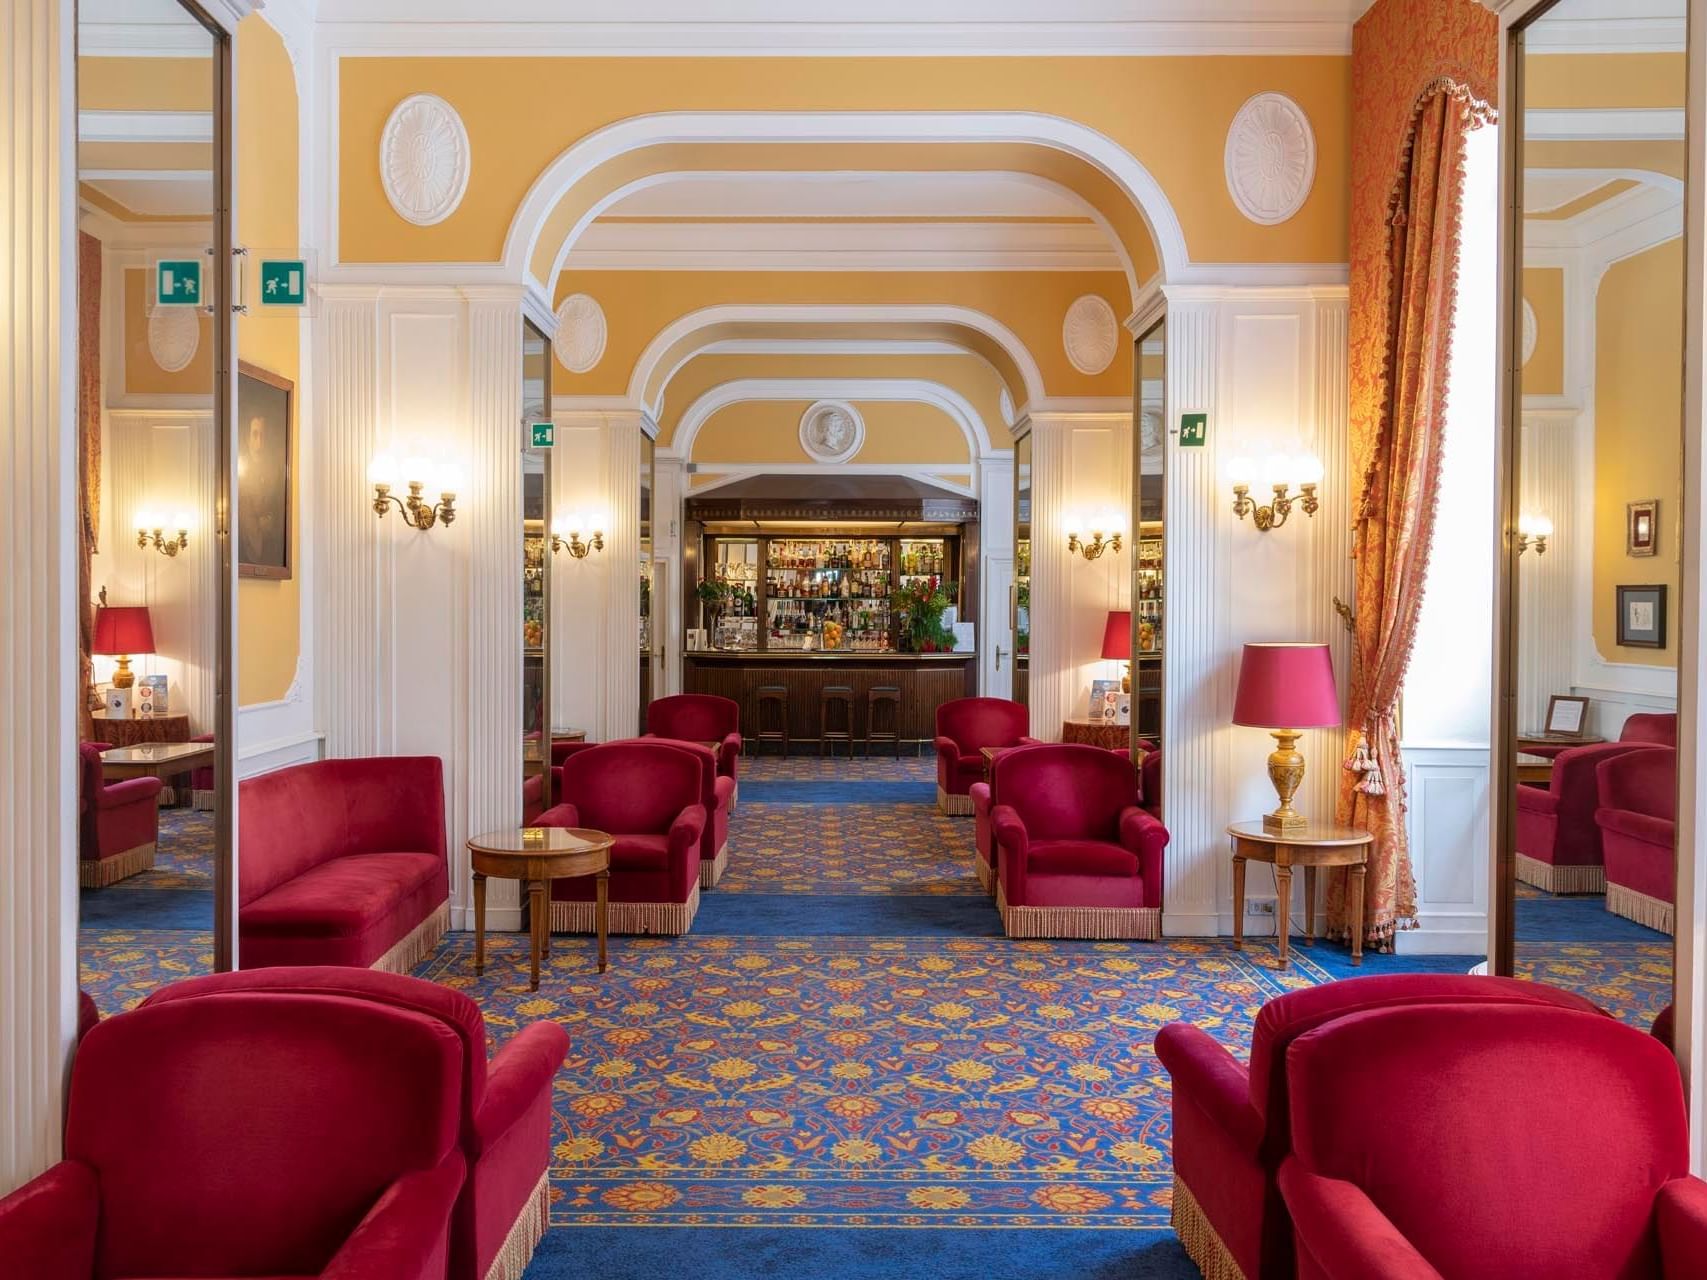 Hotel lobby with red chairs and blue carpet at Bettoja Hotel Massimo D´Azeglio